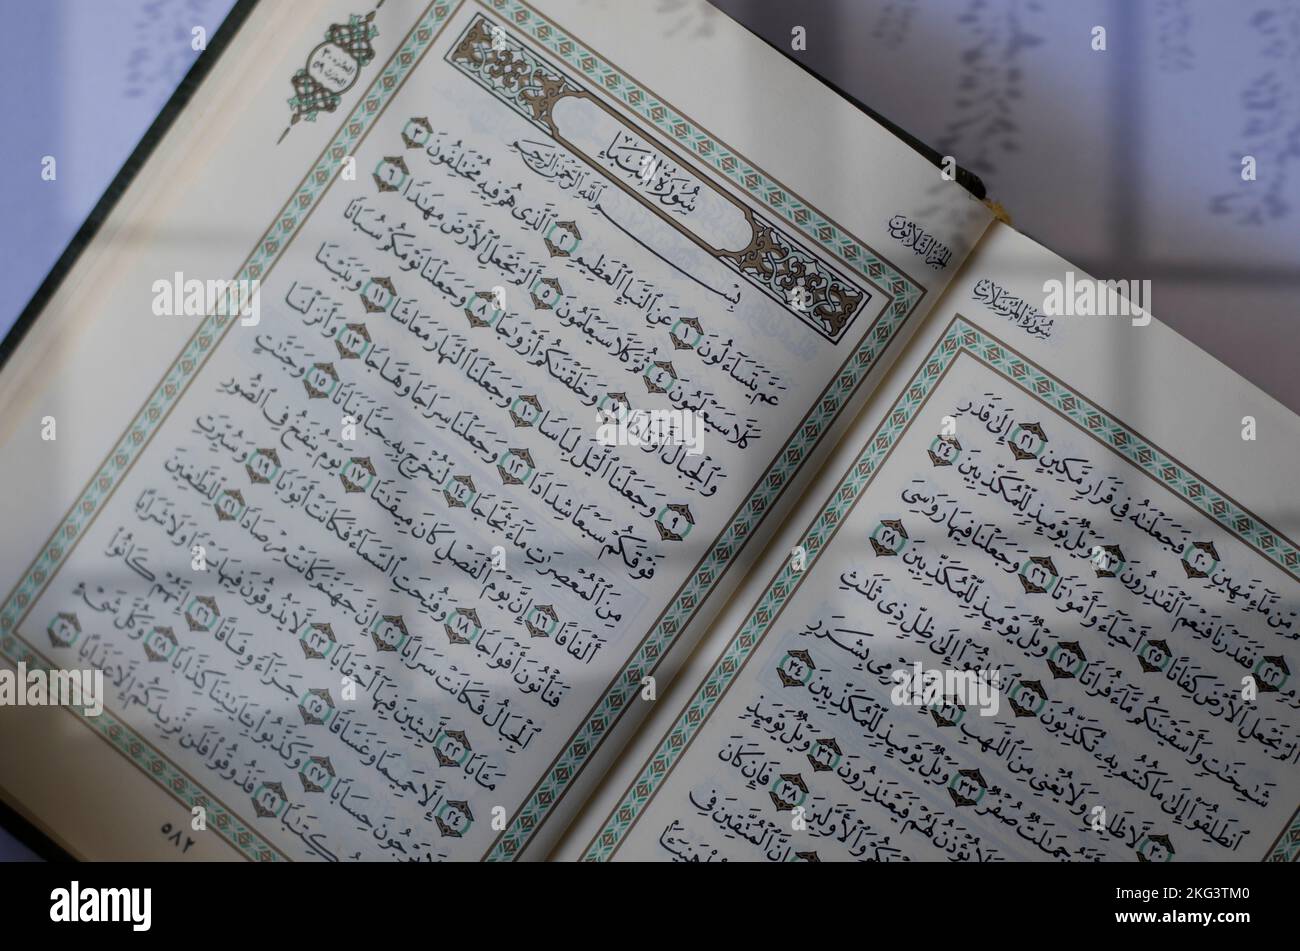 The Holy Quran Chapter 78th Surah Naba .A Surah Naba is the 78th chapter (surah) of the Qur'an with 40 verses (ayat). Stock Photo